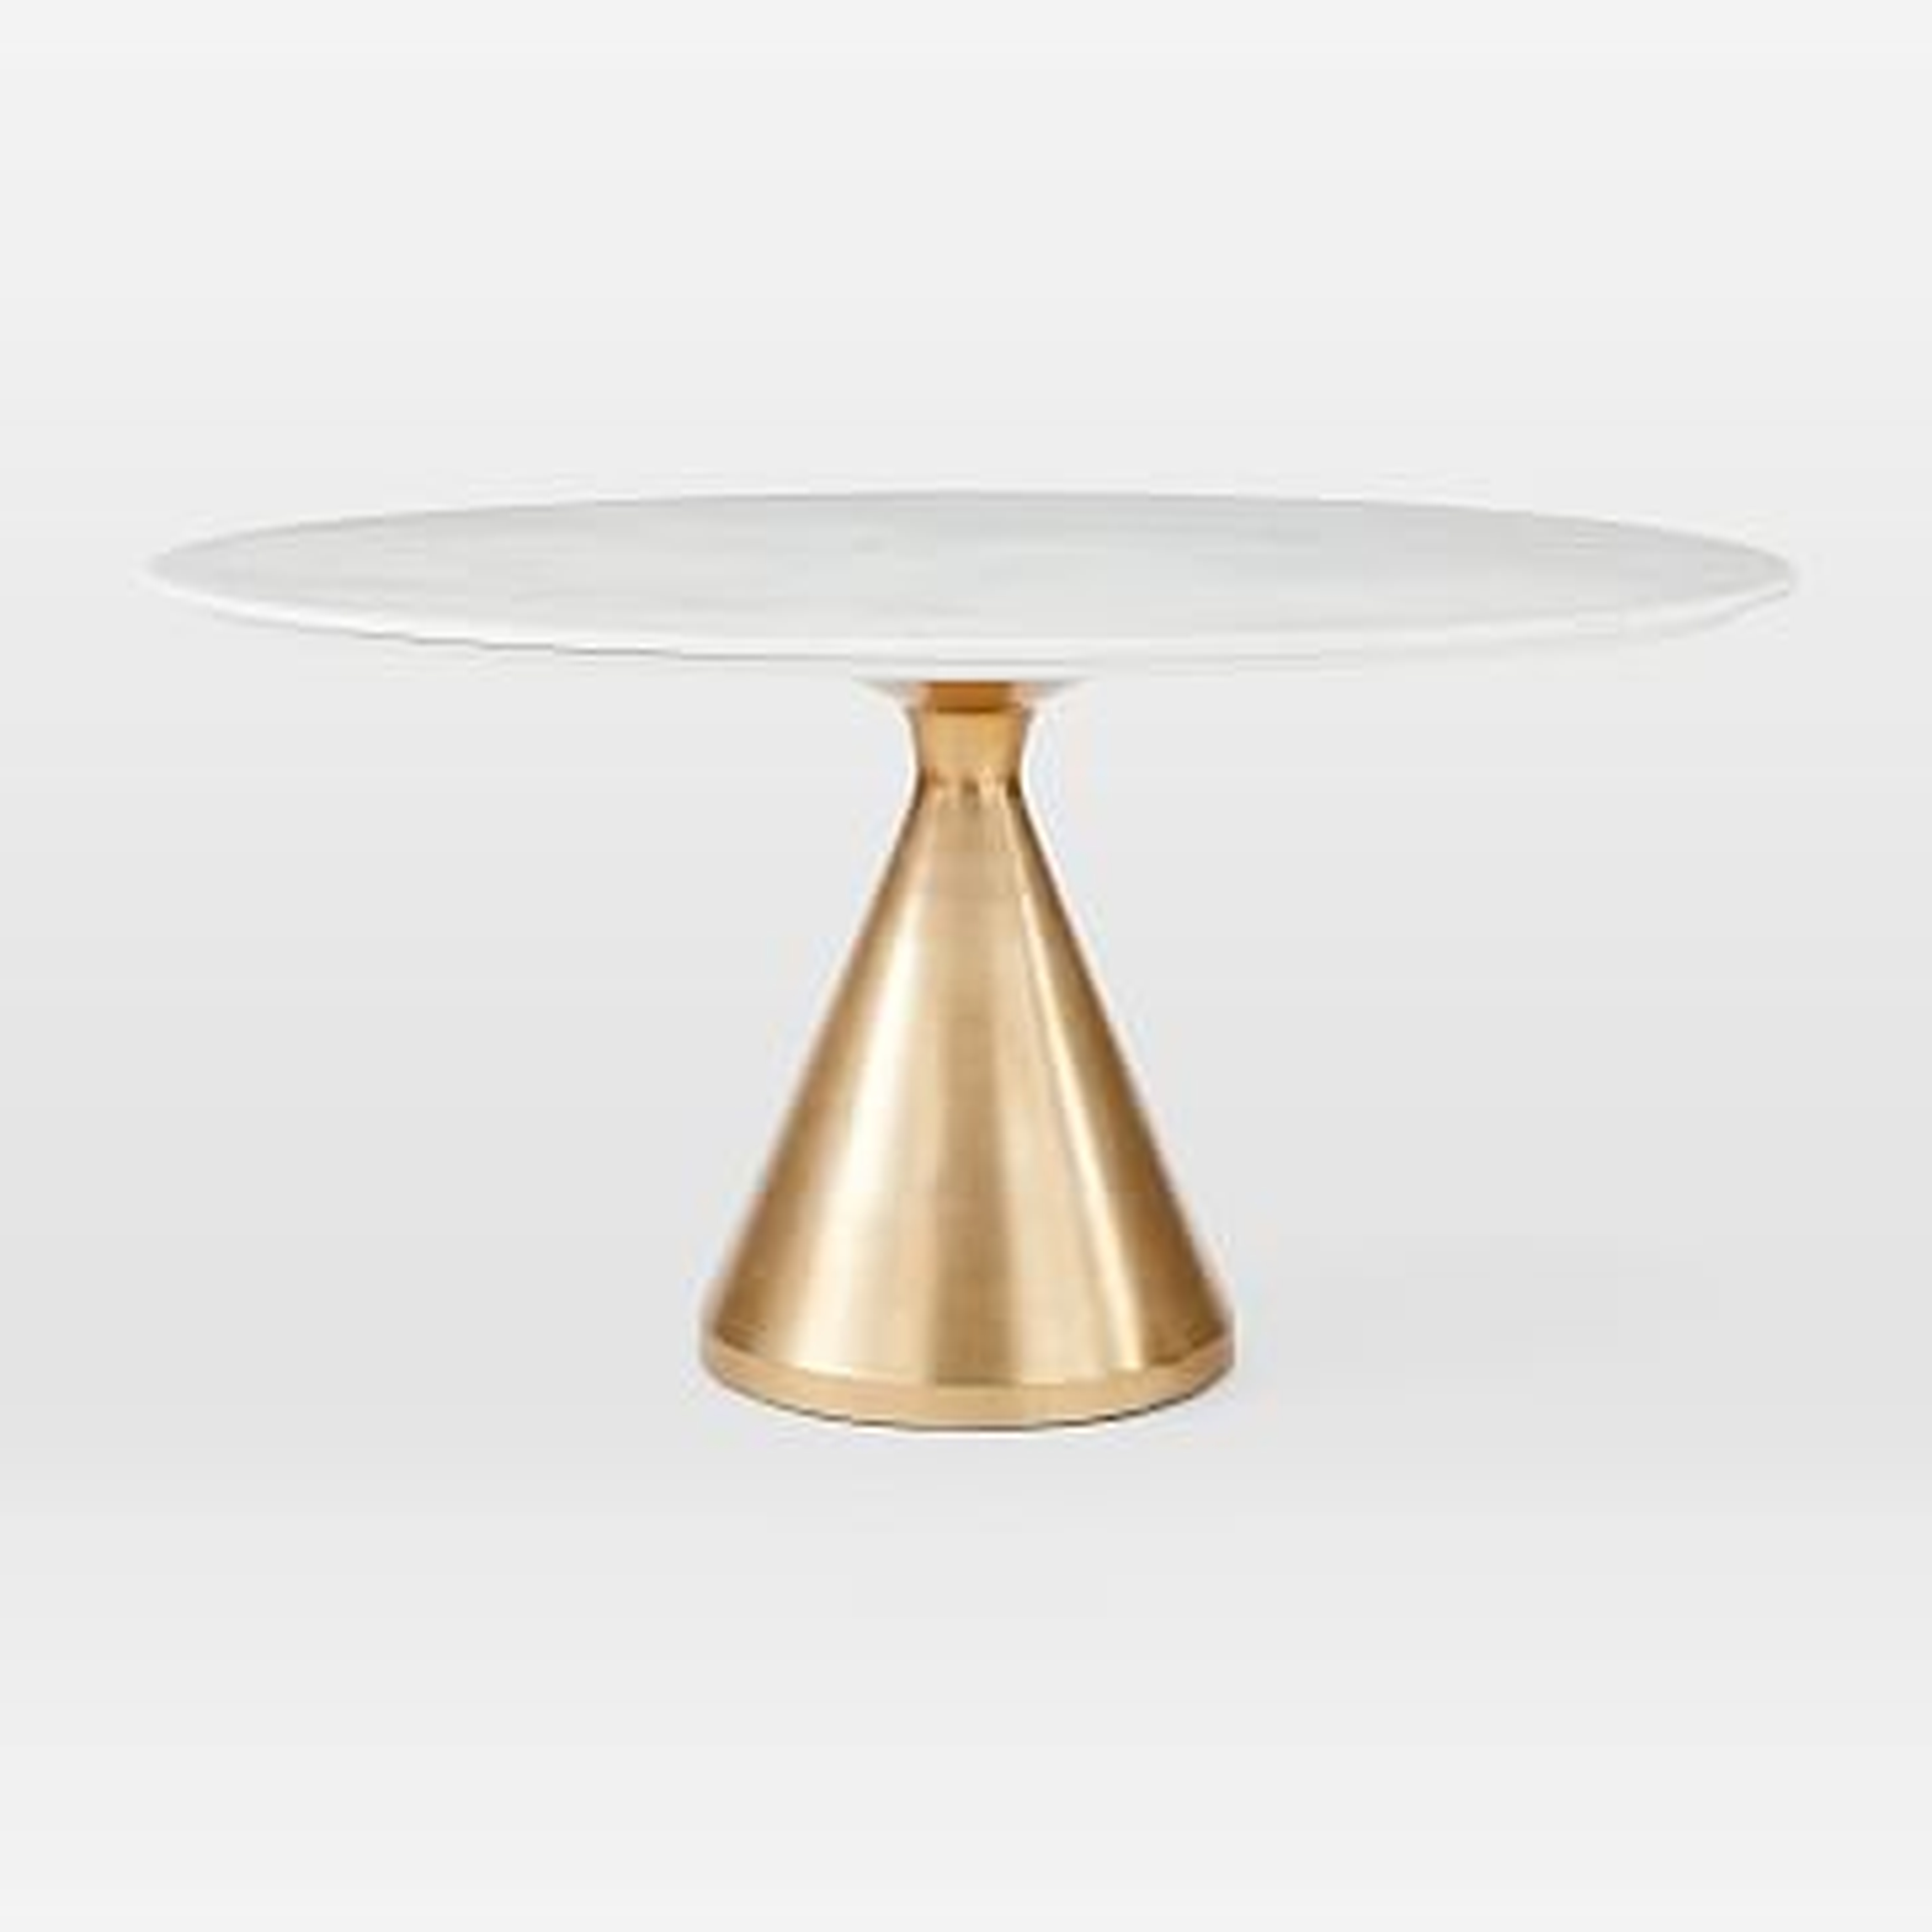 Silhouette Pedestal Dining Table, Round White Marble, Large, Antique Brass - West Elm